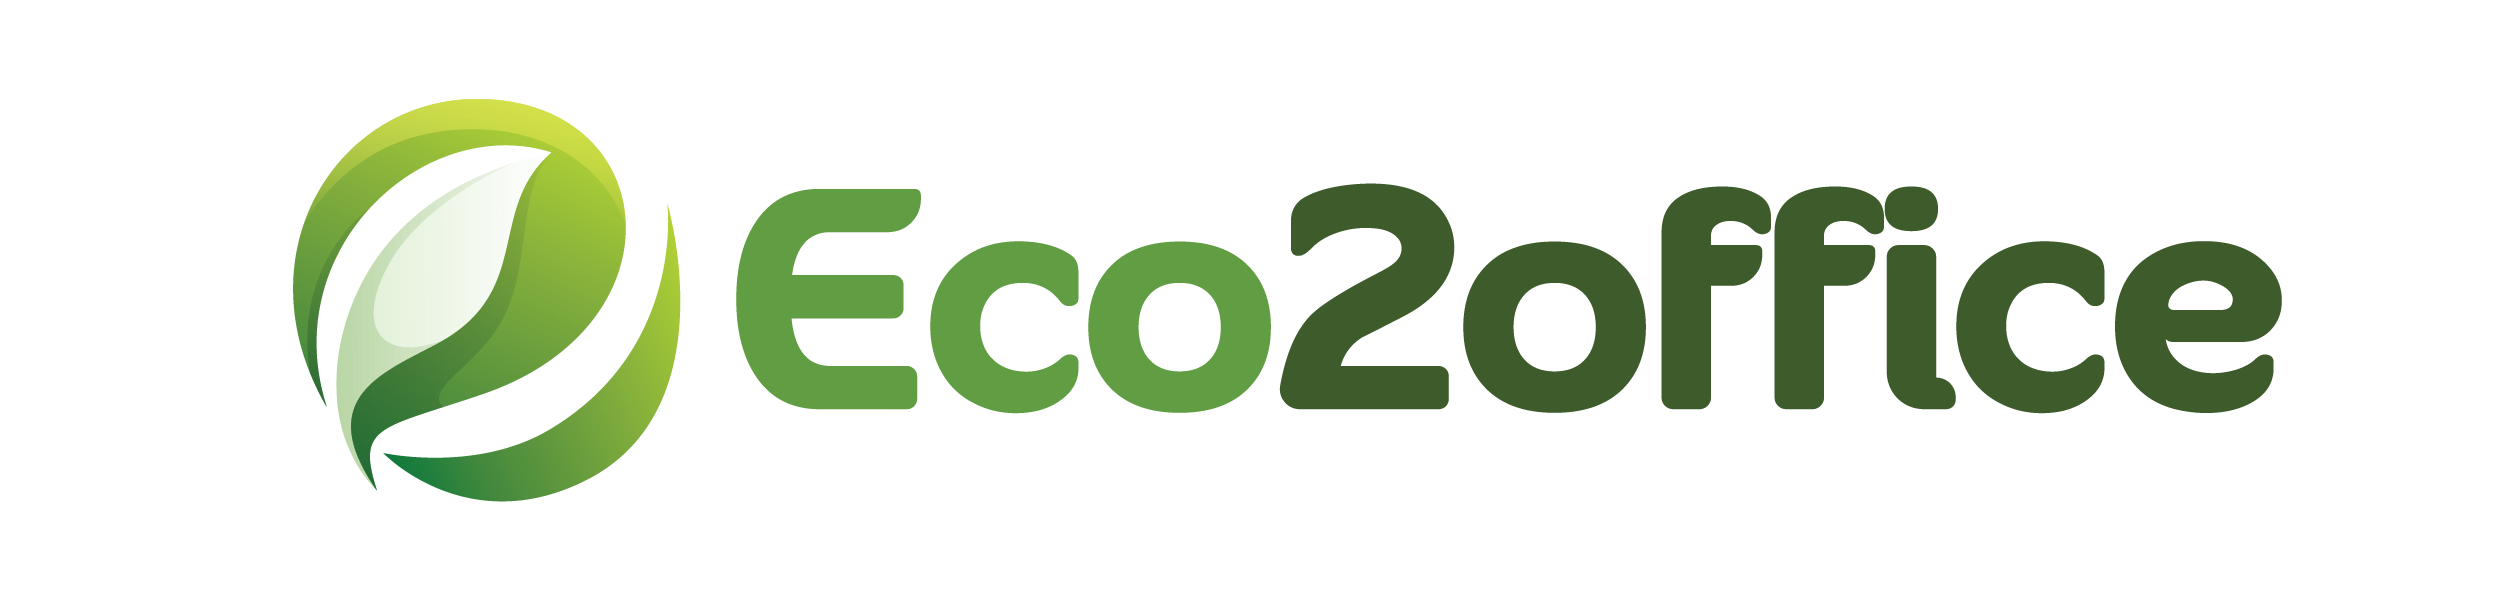 Eco2Office - Welcome To Your Business' Success